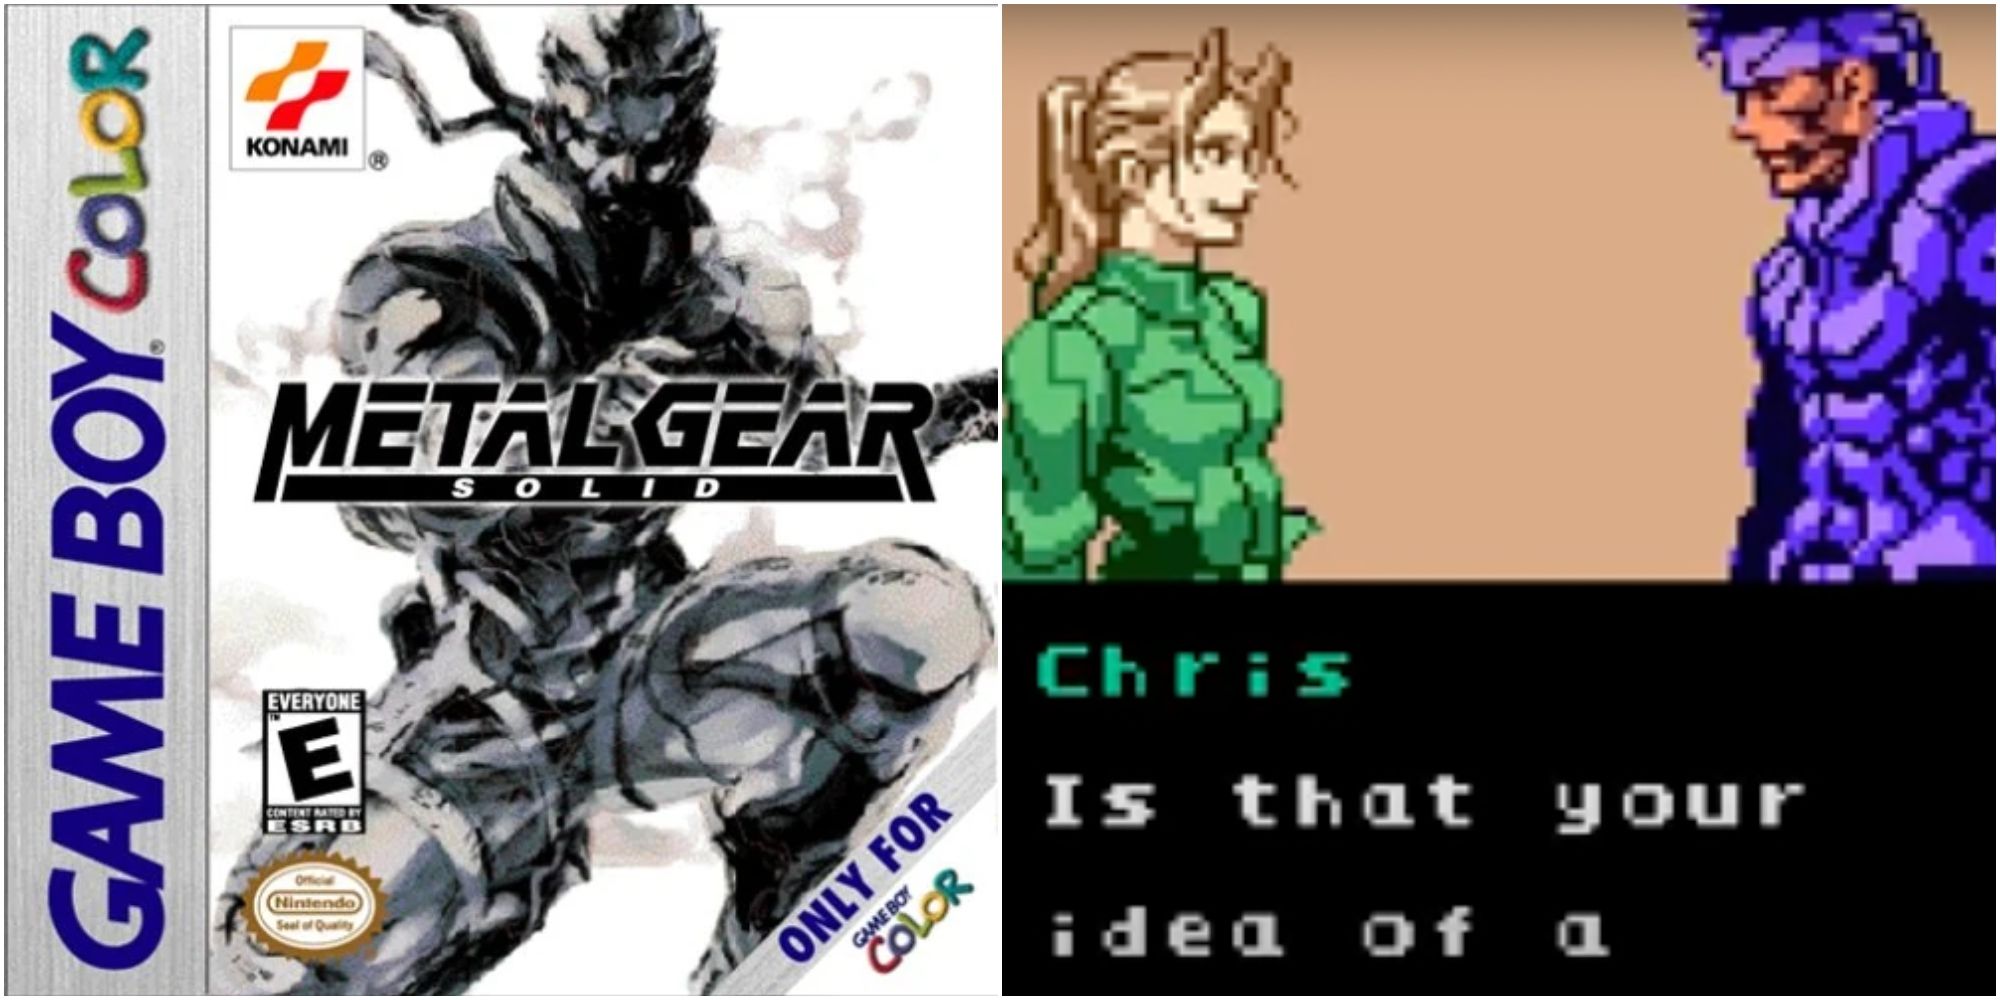 Metal Gear Solid Game Boy Color US cover, beside a cutscene of Snake and Chris speaking